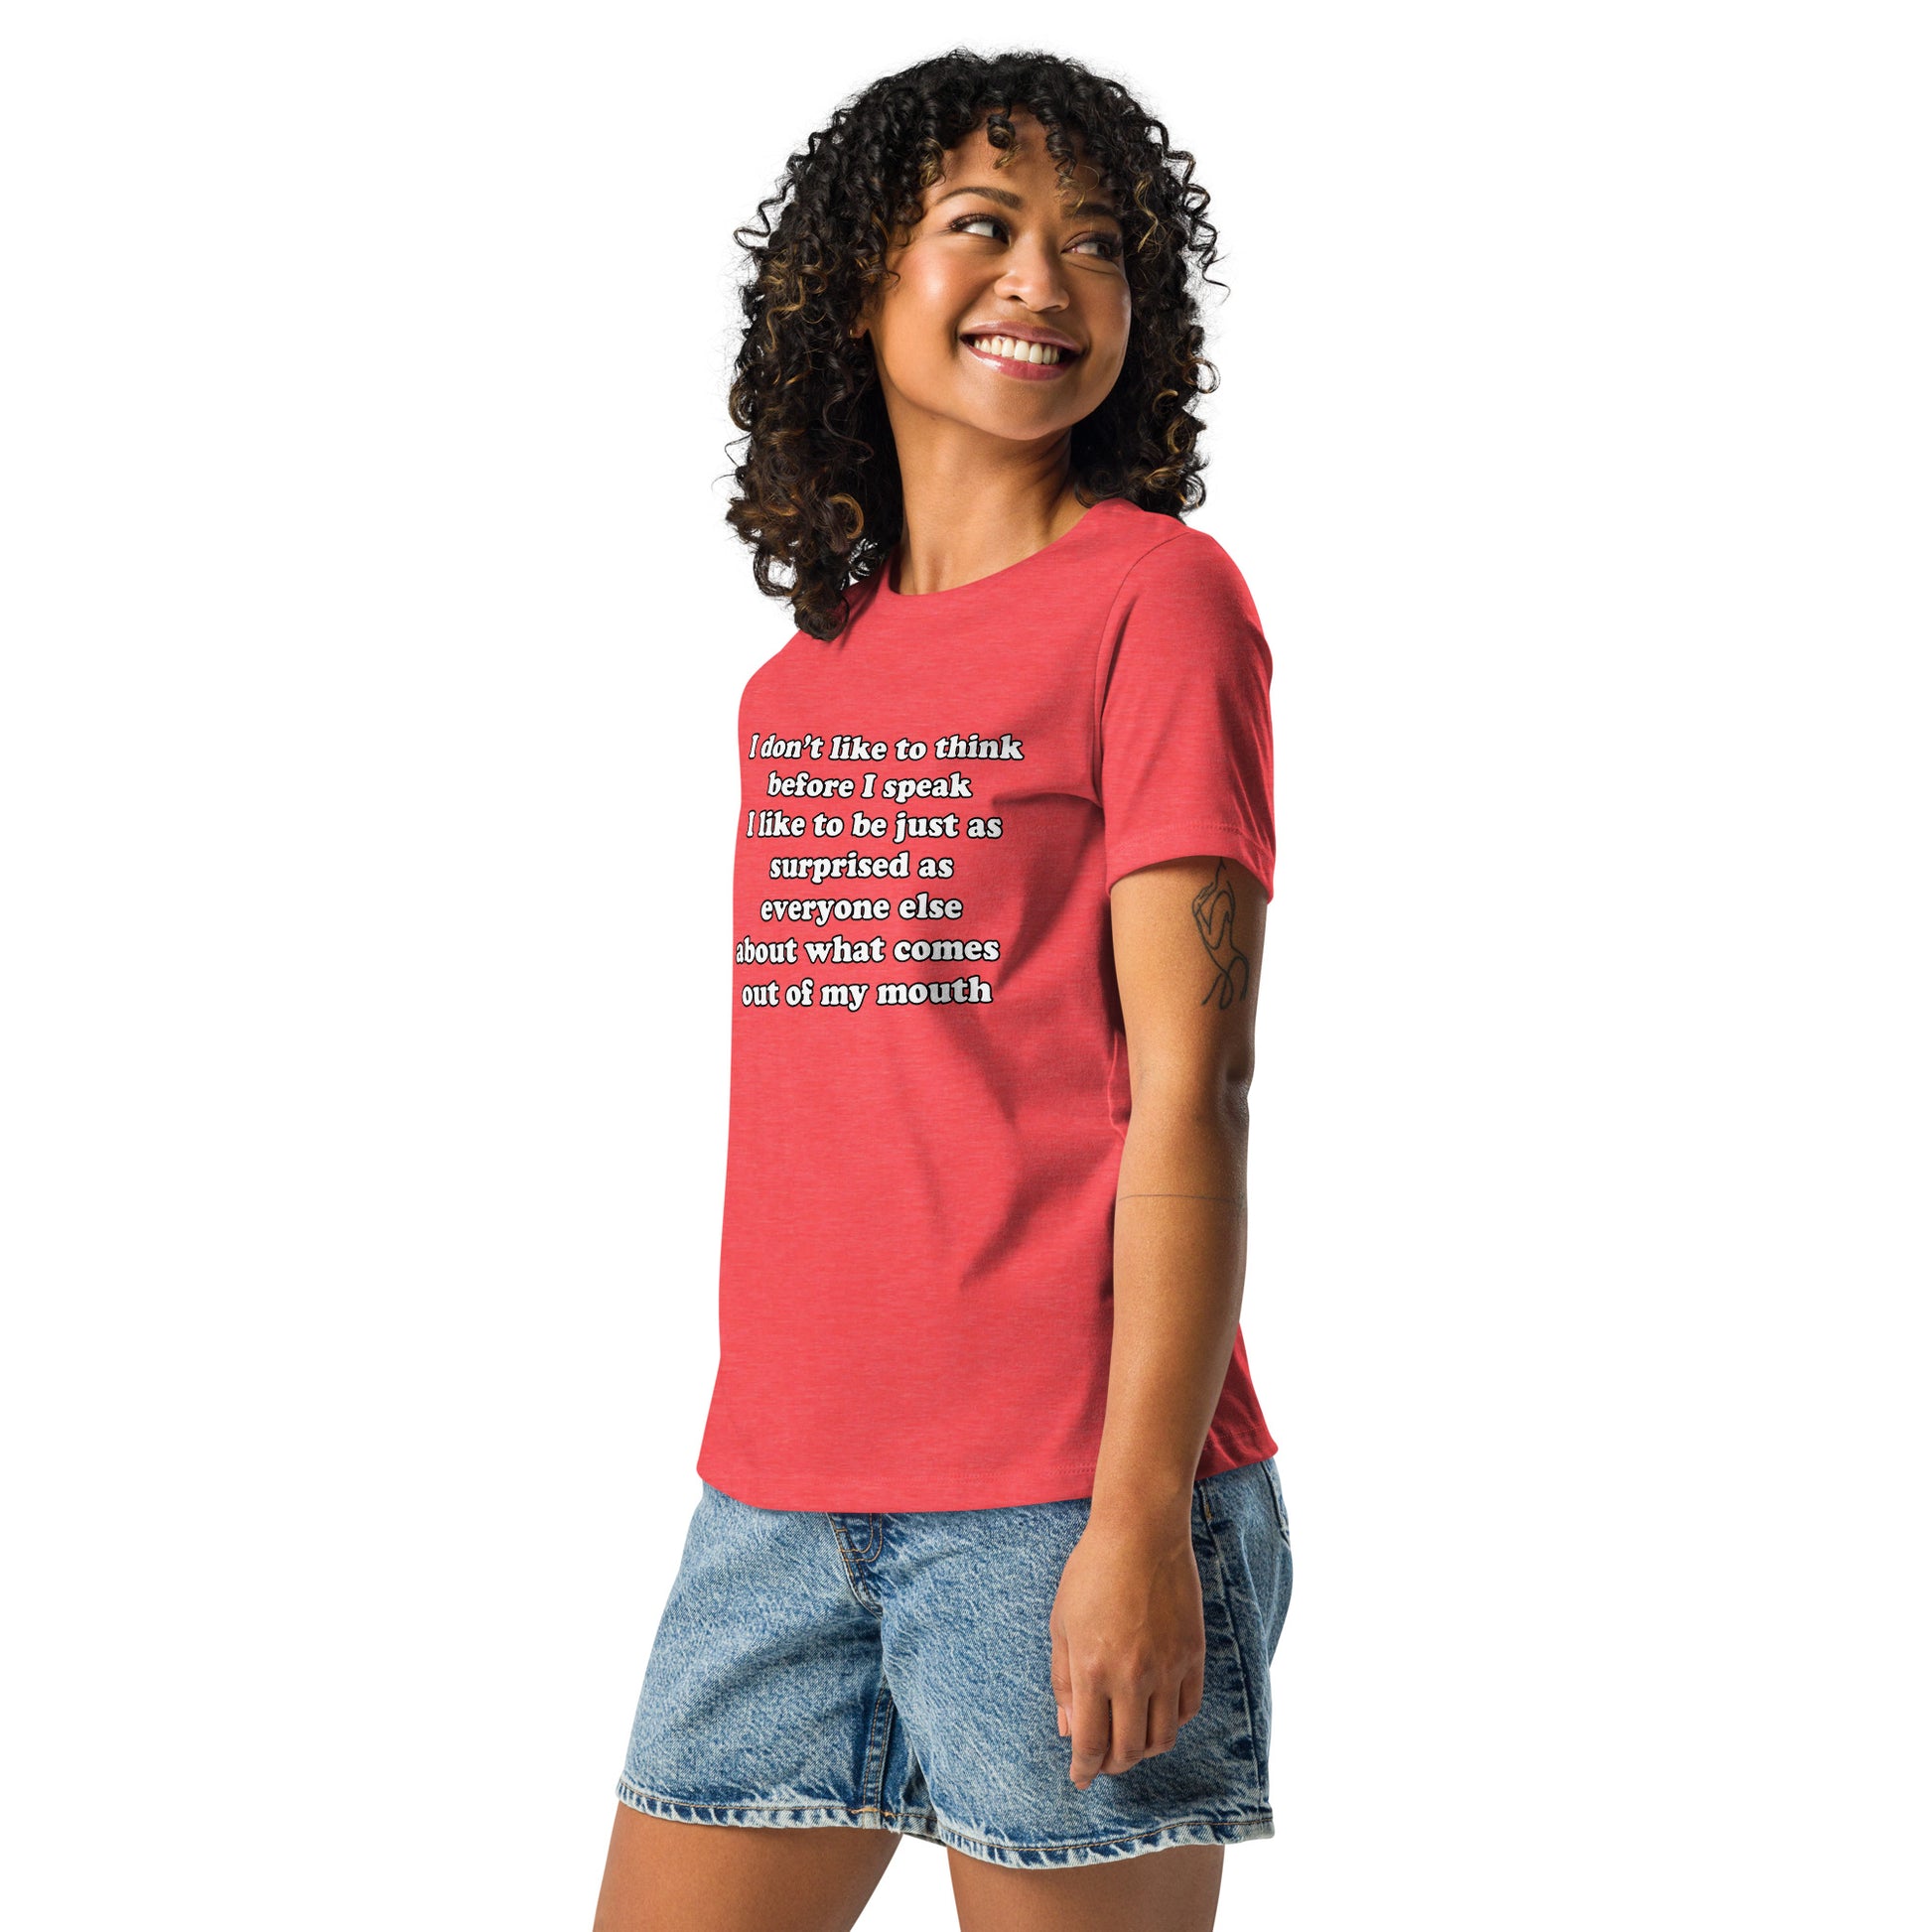 Woman with red t-shirt with text “I don't think before I speak Just as serprised as everyone about what comes out of my mouth"